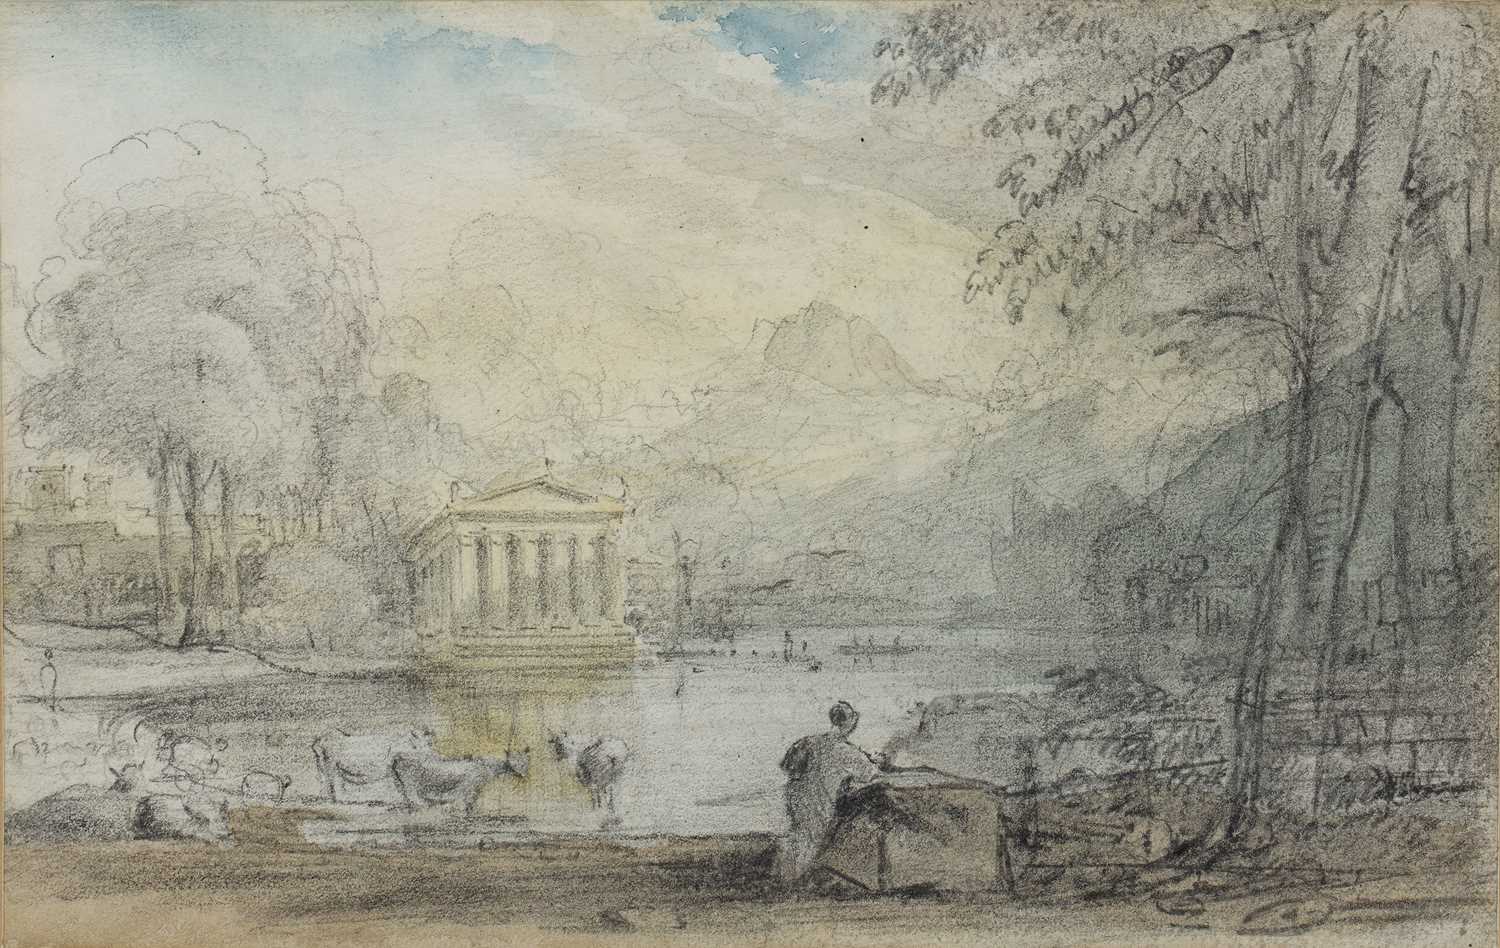 John Varley (1778-1842) Ruins in a landscape, pencil and watercolour, 11 x 17cm